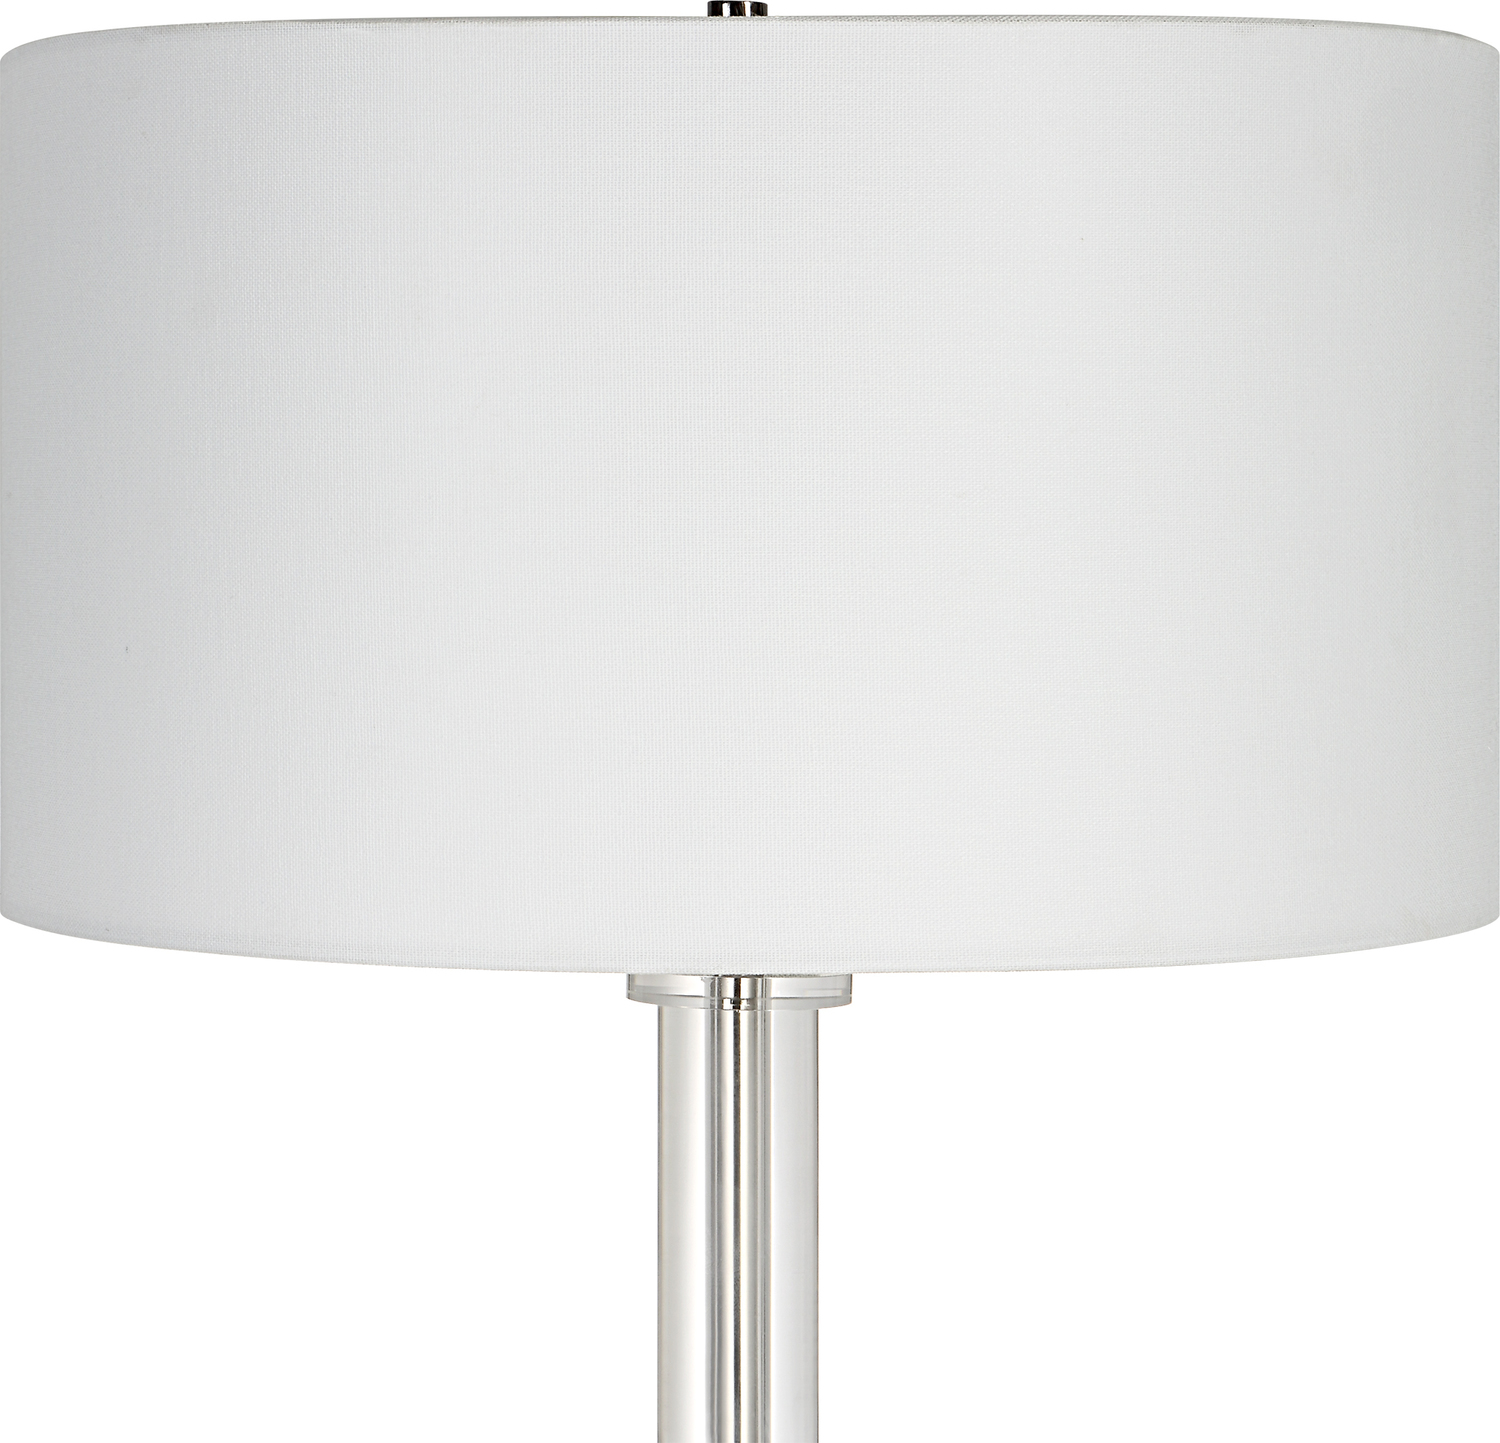 light for room ceiling Uttermost Steel Floor Lamp This Steel Floor Lamp Features Clean, Simple Detailing With A Polished Nickel Base And Unique Foot, Adorned With Thick Crystal Accents.